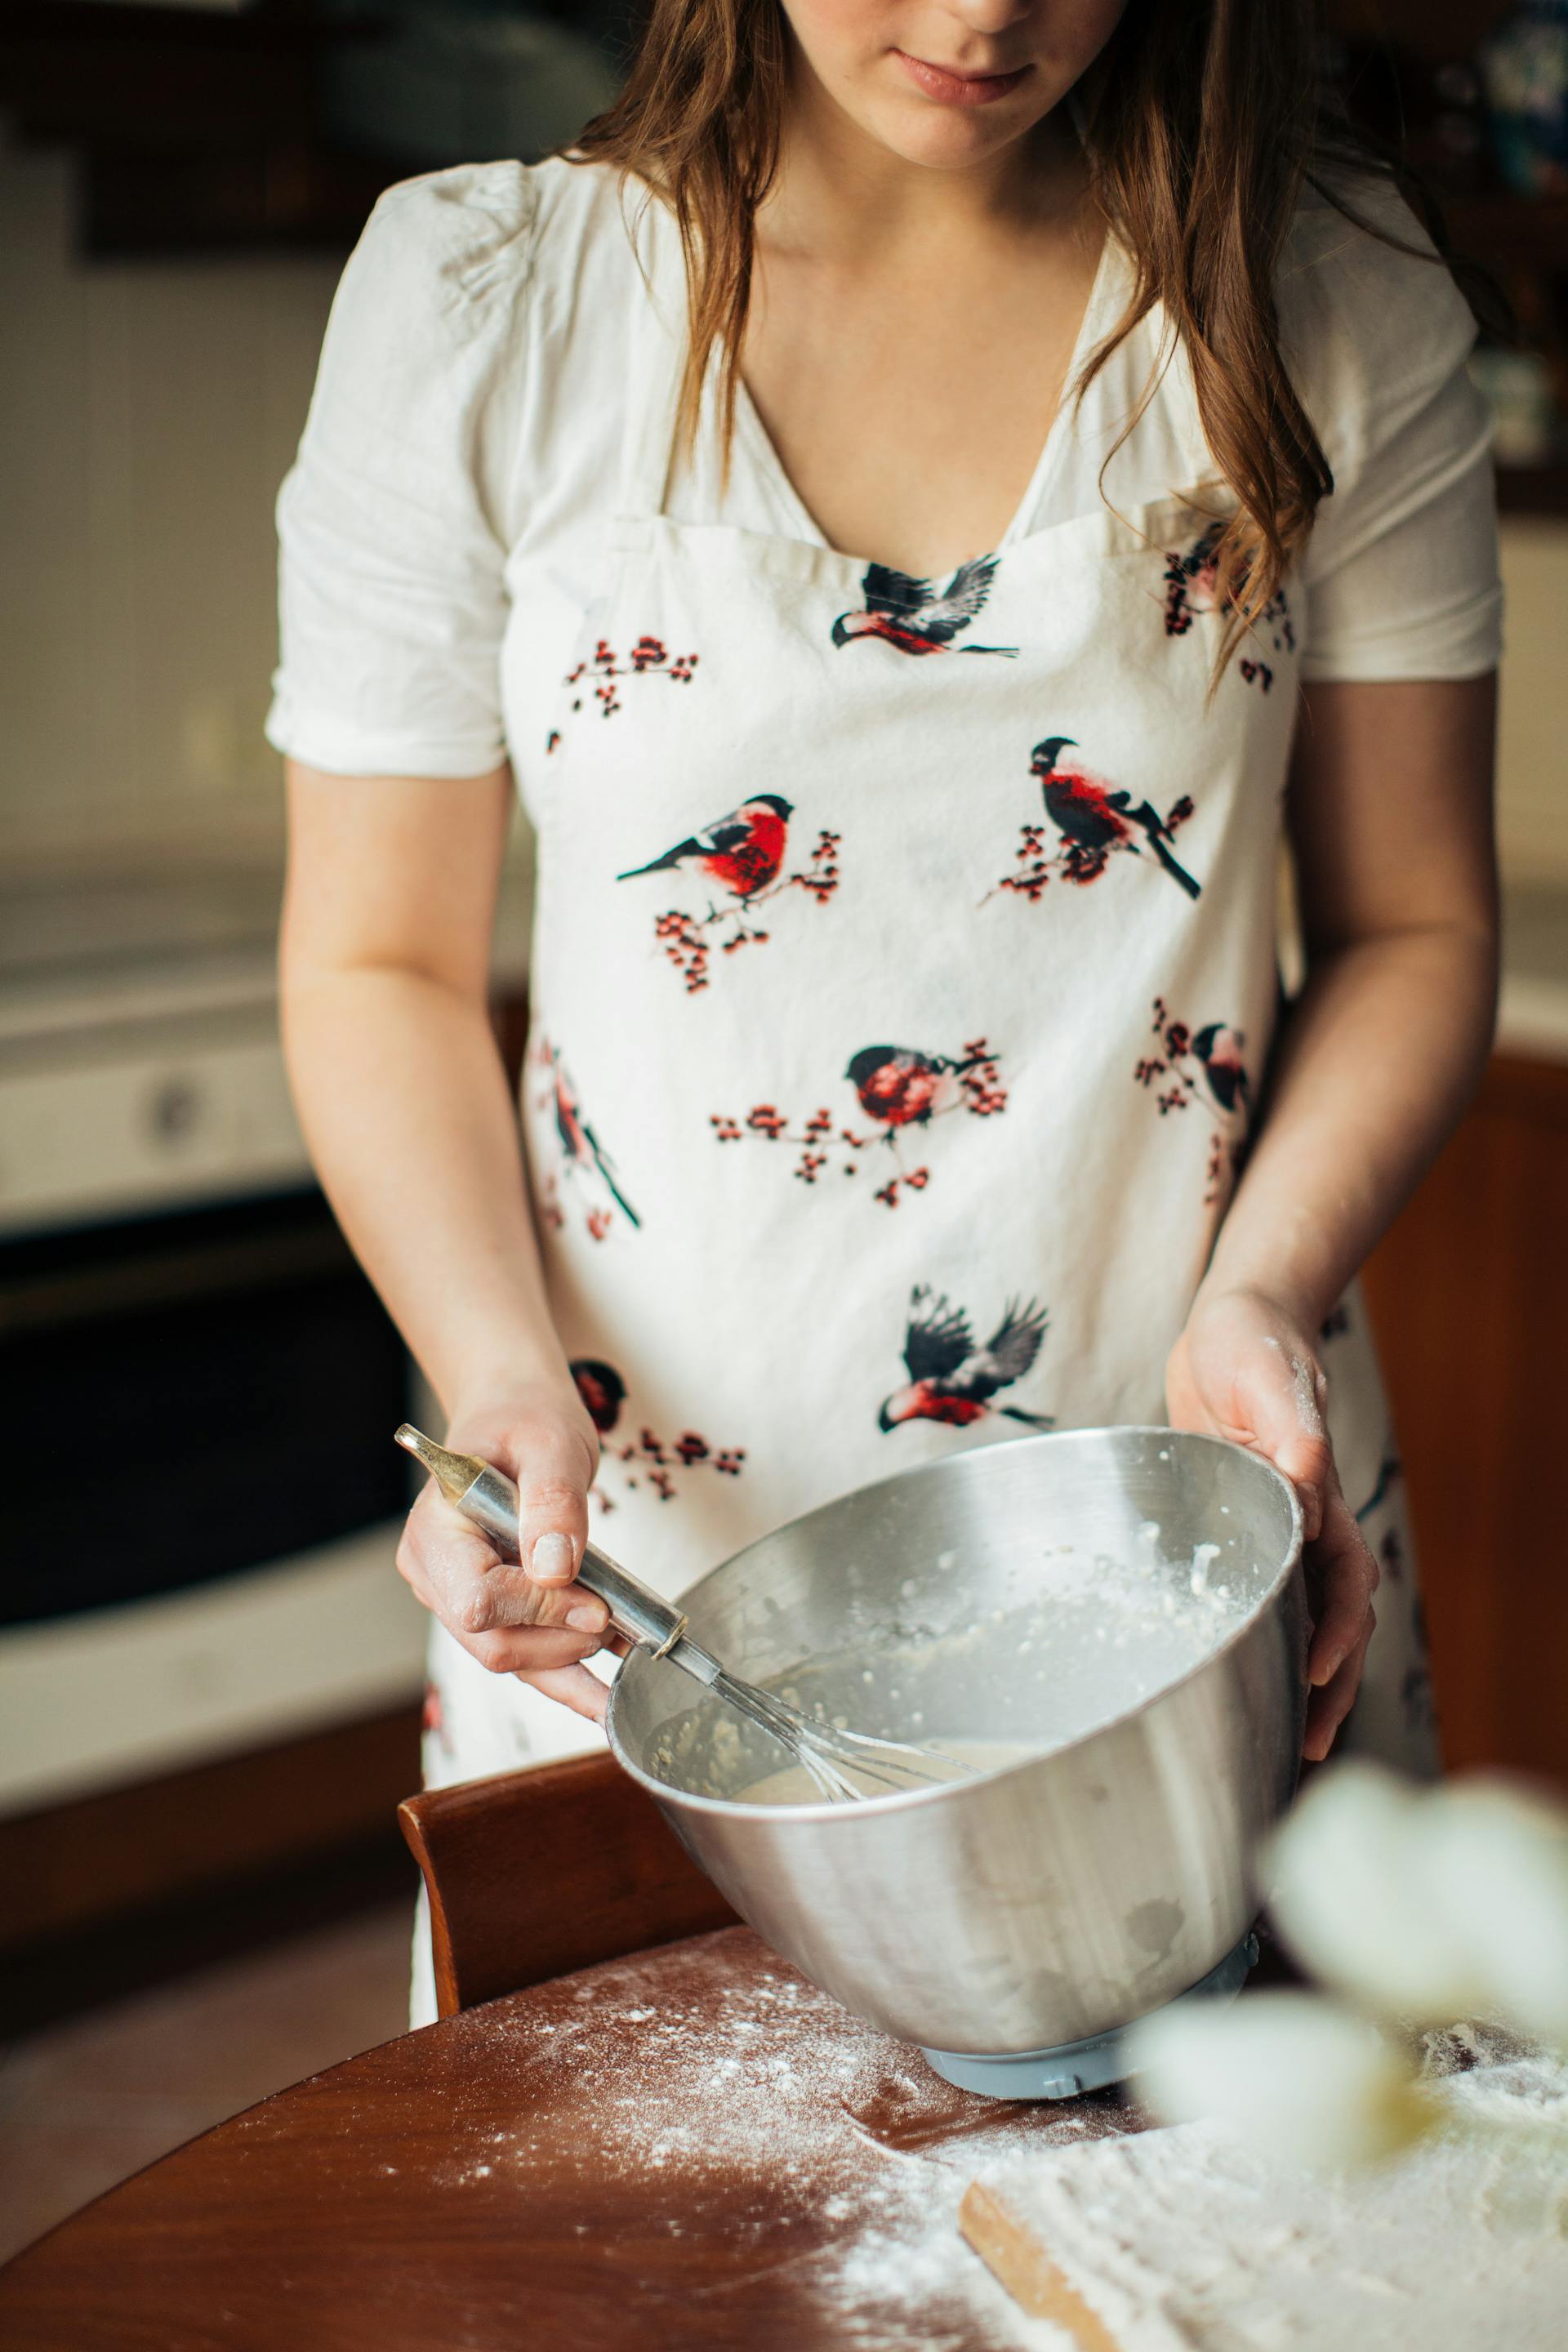 A woman wearing an apron and holding a bowl | Source: Pexels